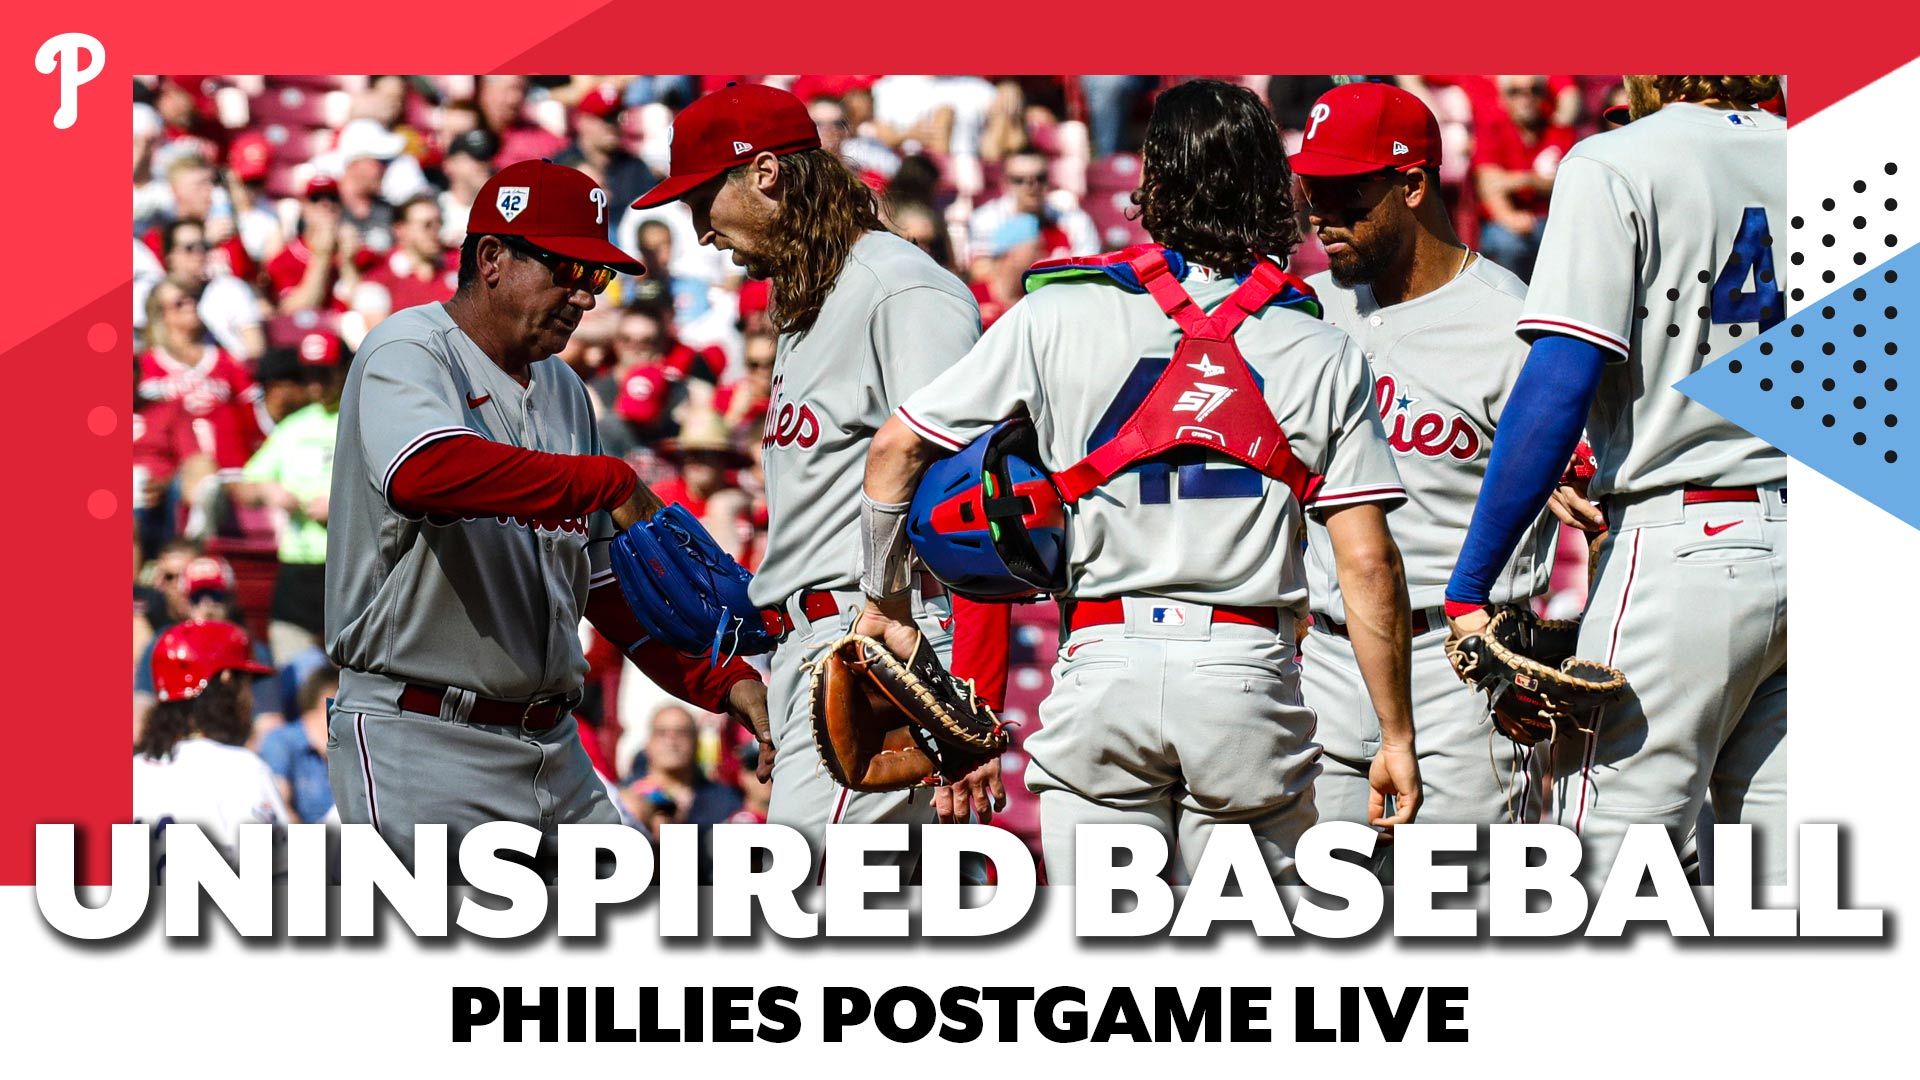 Phillies pitching the main cause of concern after uninspired loss – NBC  Sports Philadelphia